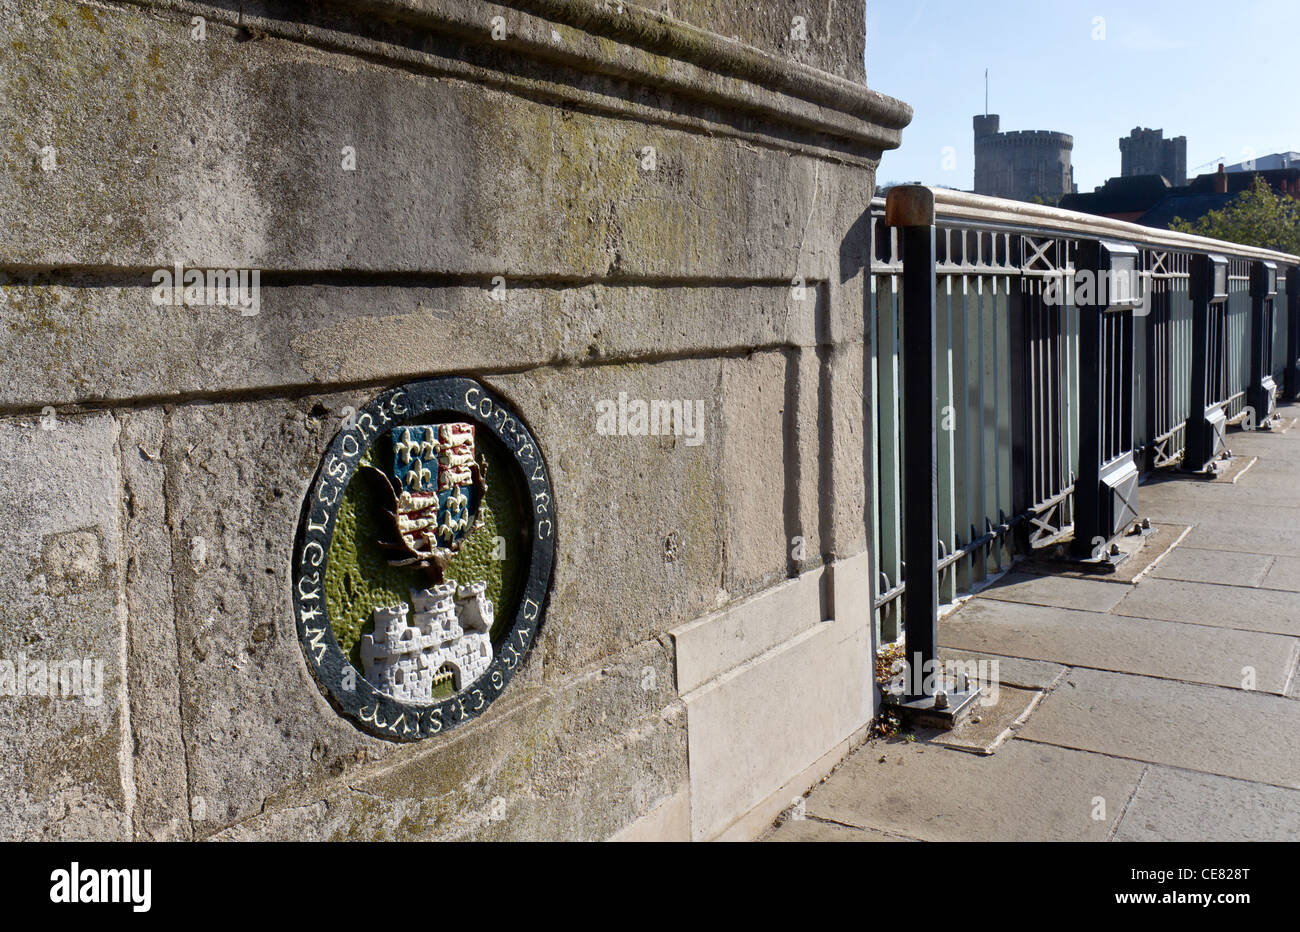 Detail of Windsor Bridge showing a plaque with the Royal Coat of Arms and a depiction of Windsor Castle (seen in the background) Stock Photo